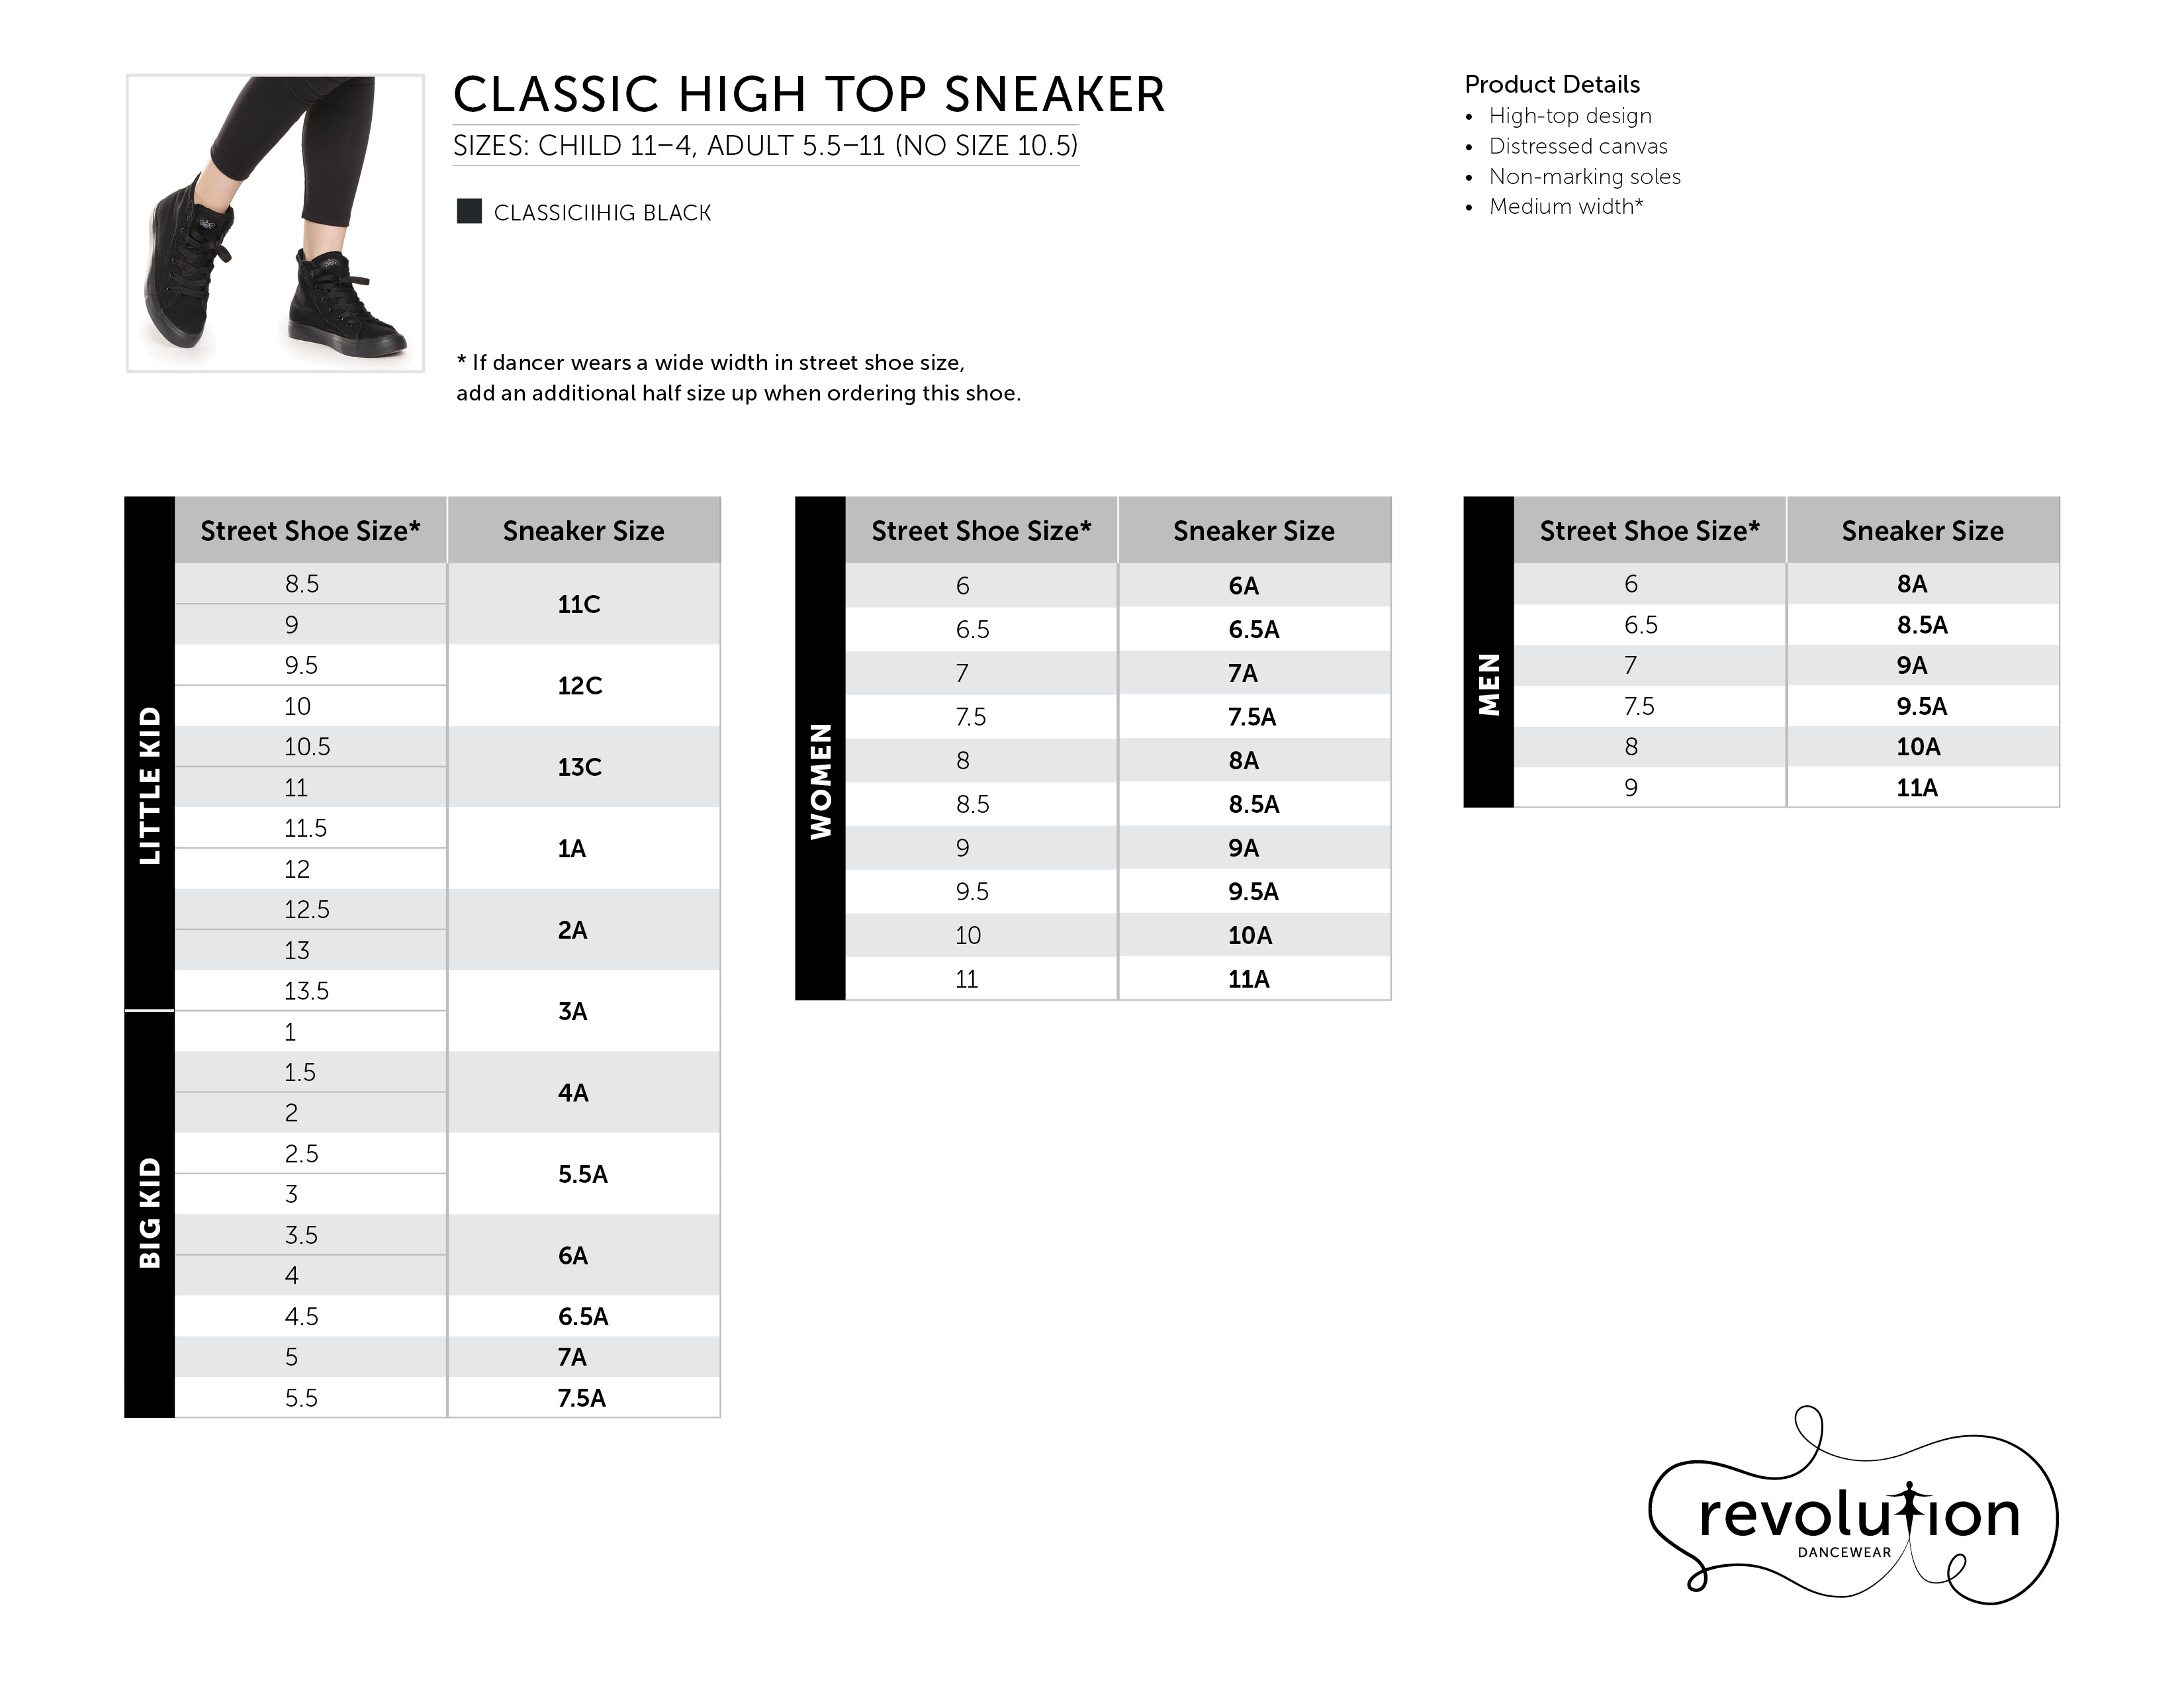 Classic High Top Sneaker Sizing Kit